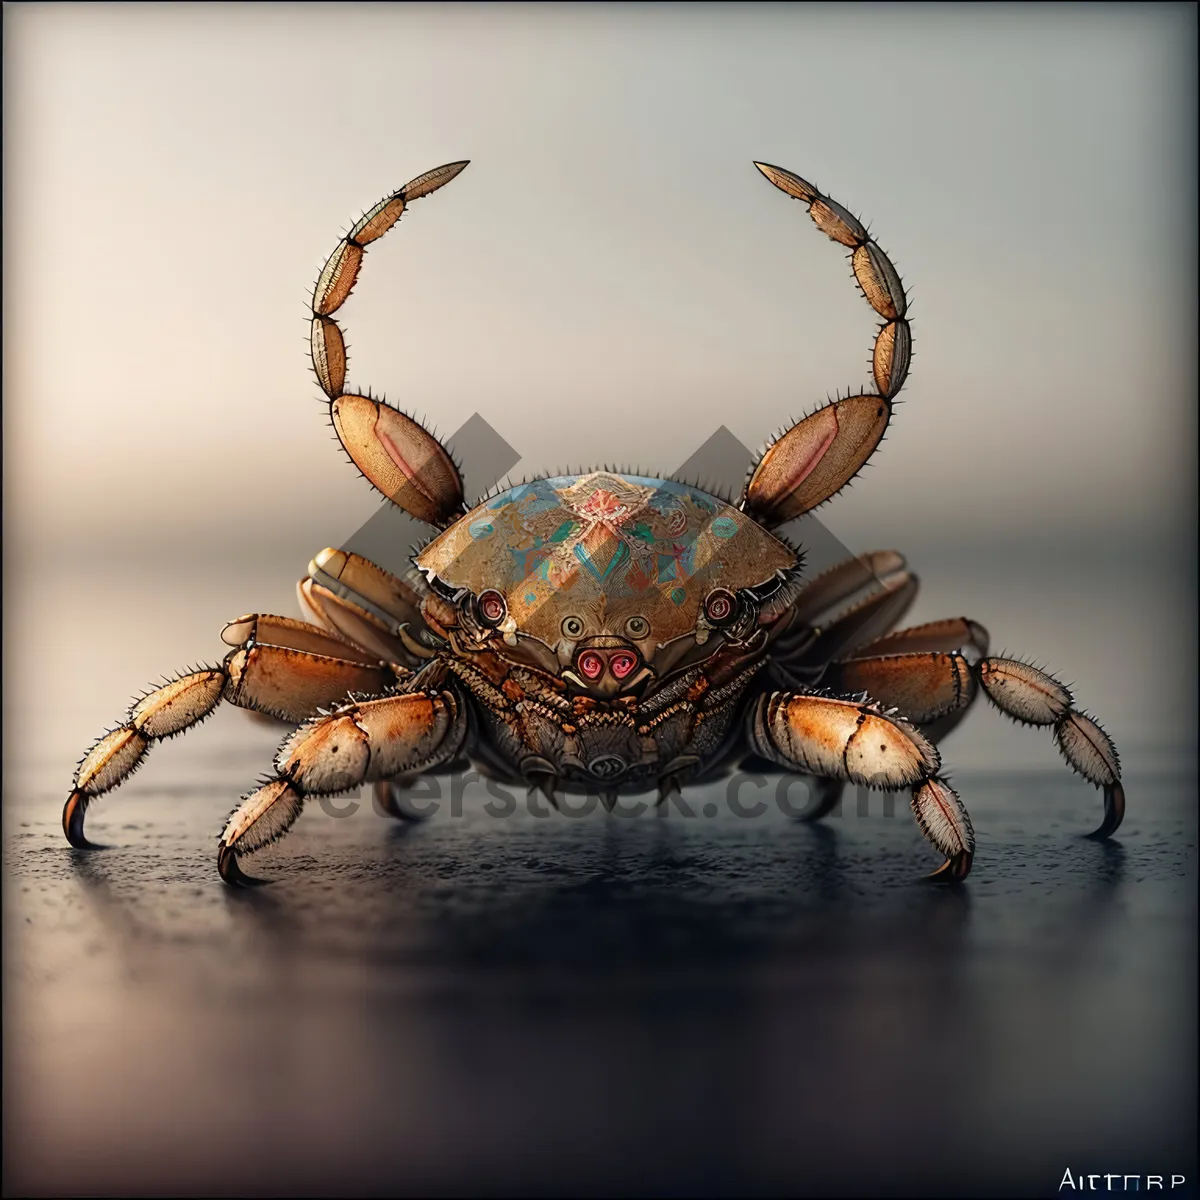 Picture of Poisonous Rock Crab with Sinister Claws